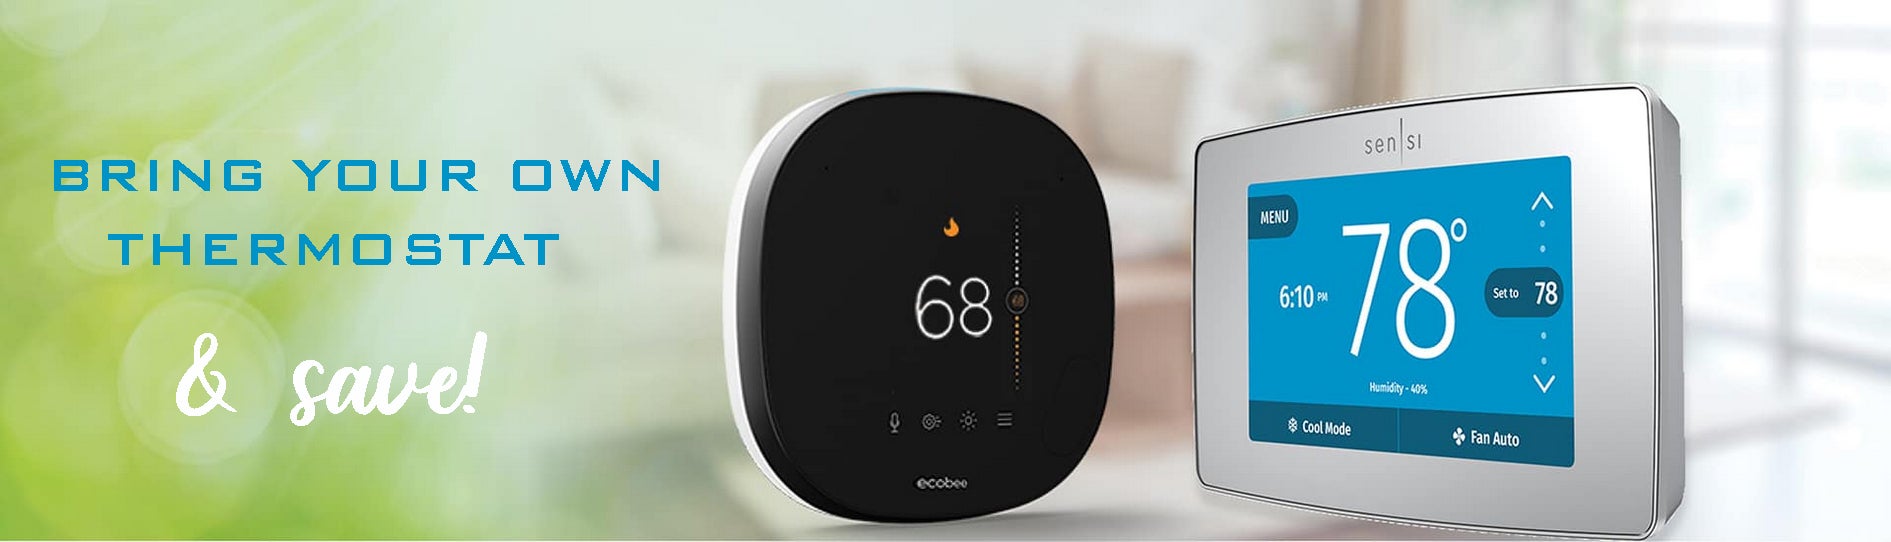 photo of smart thermostats